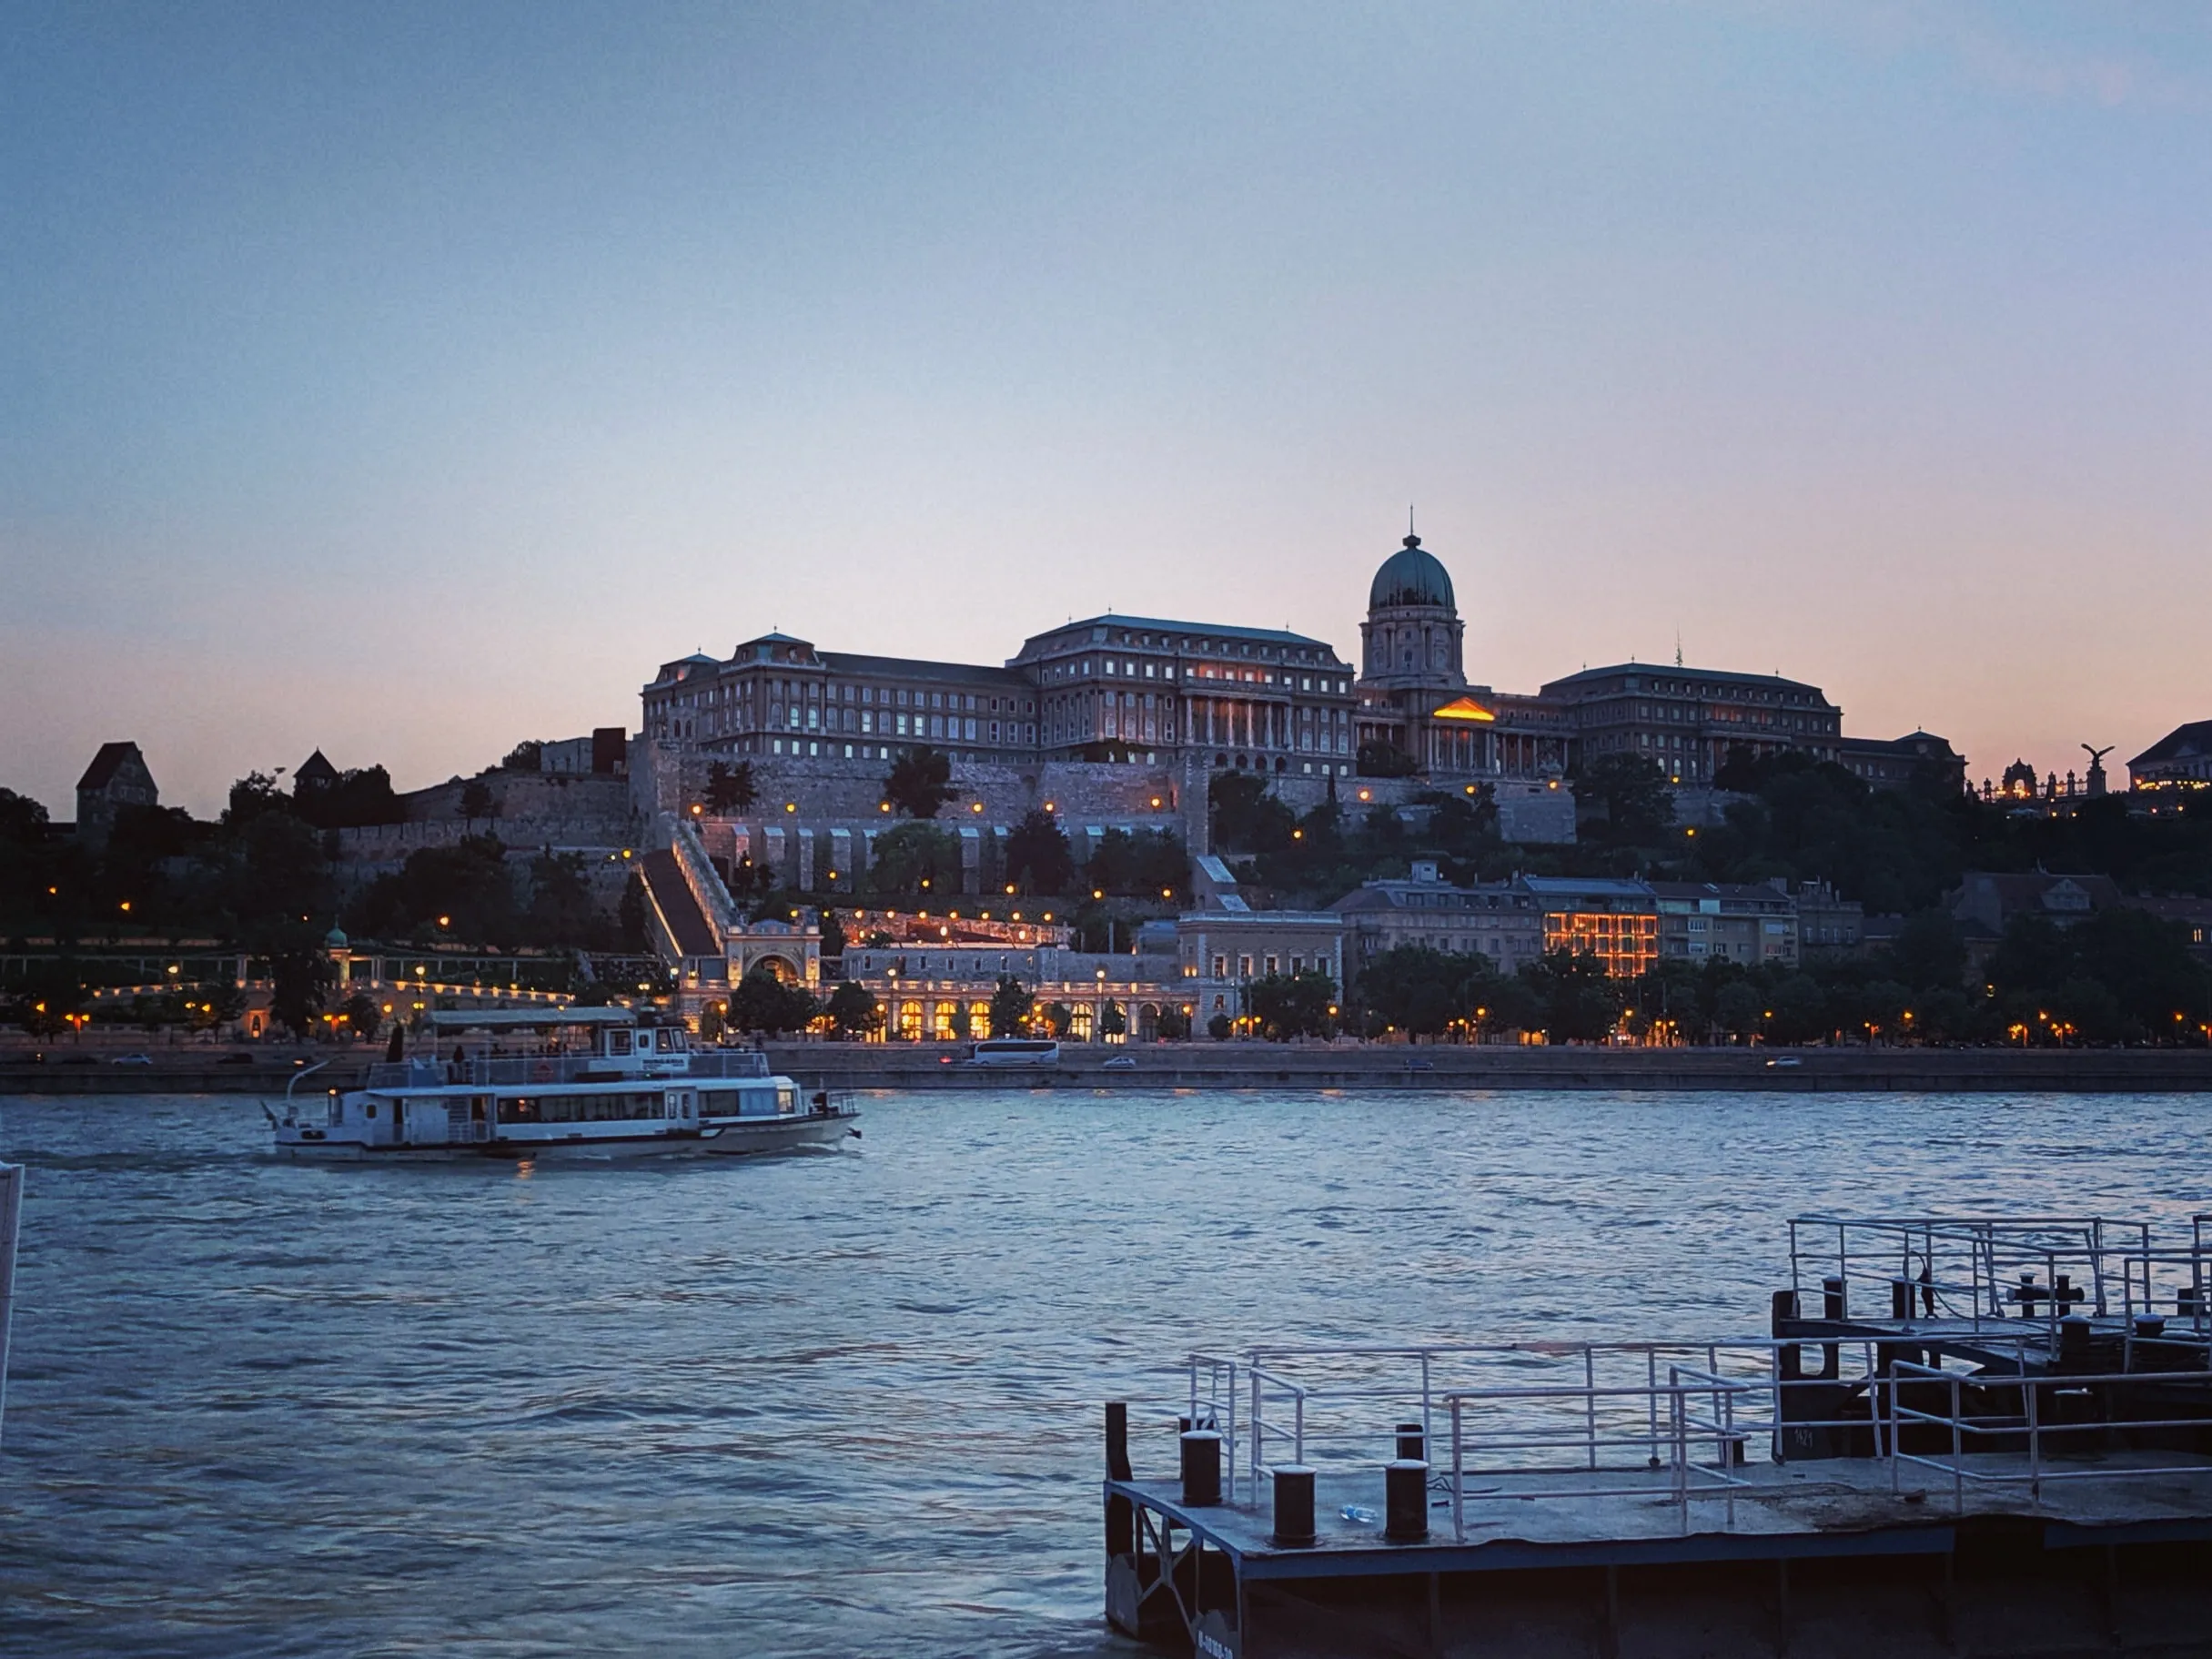 View of the Royal Palac ein Buda Castle at the start of the blue hour, photo was possibly taken from a boat on the Danube